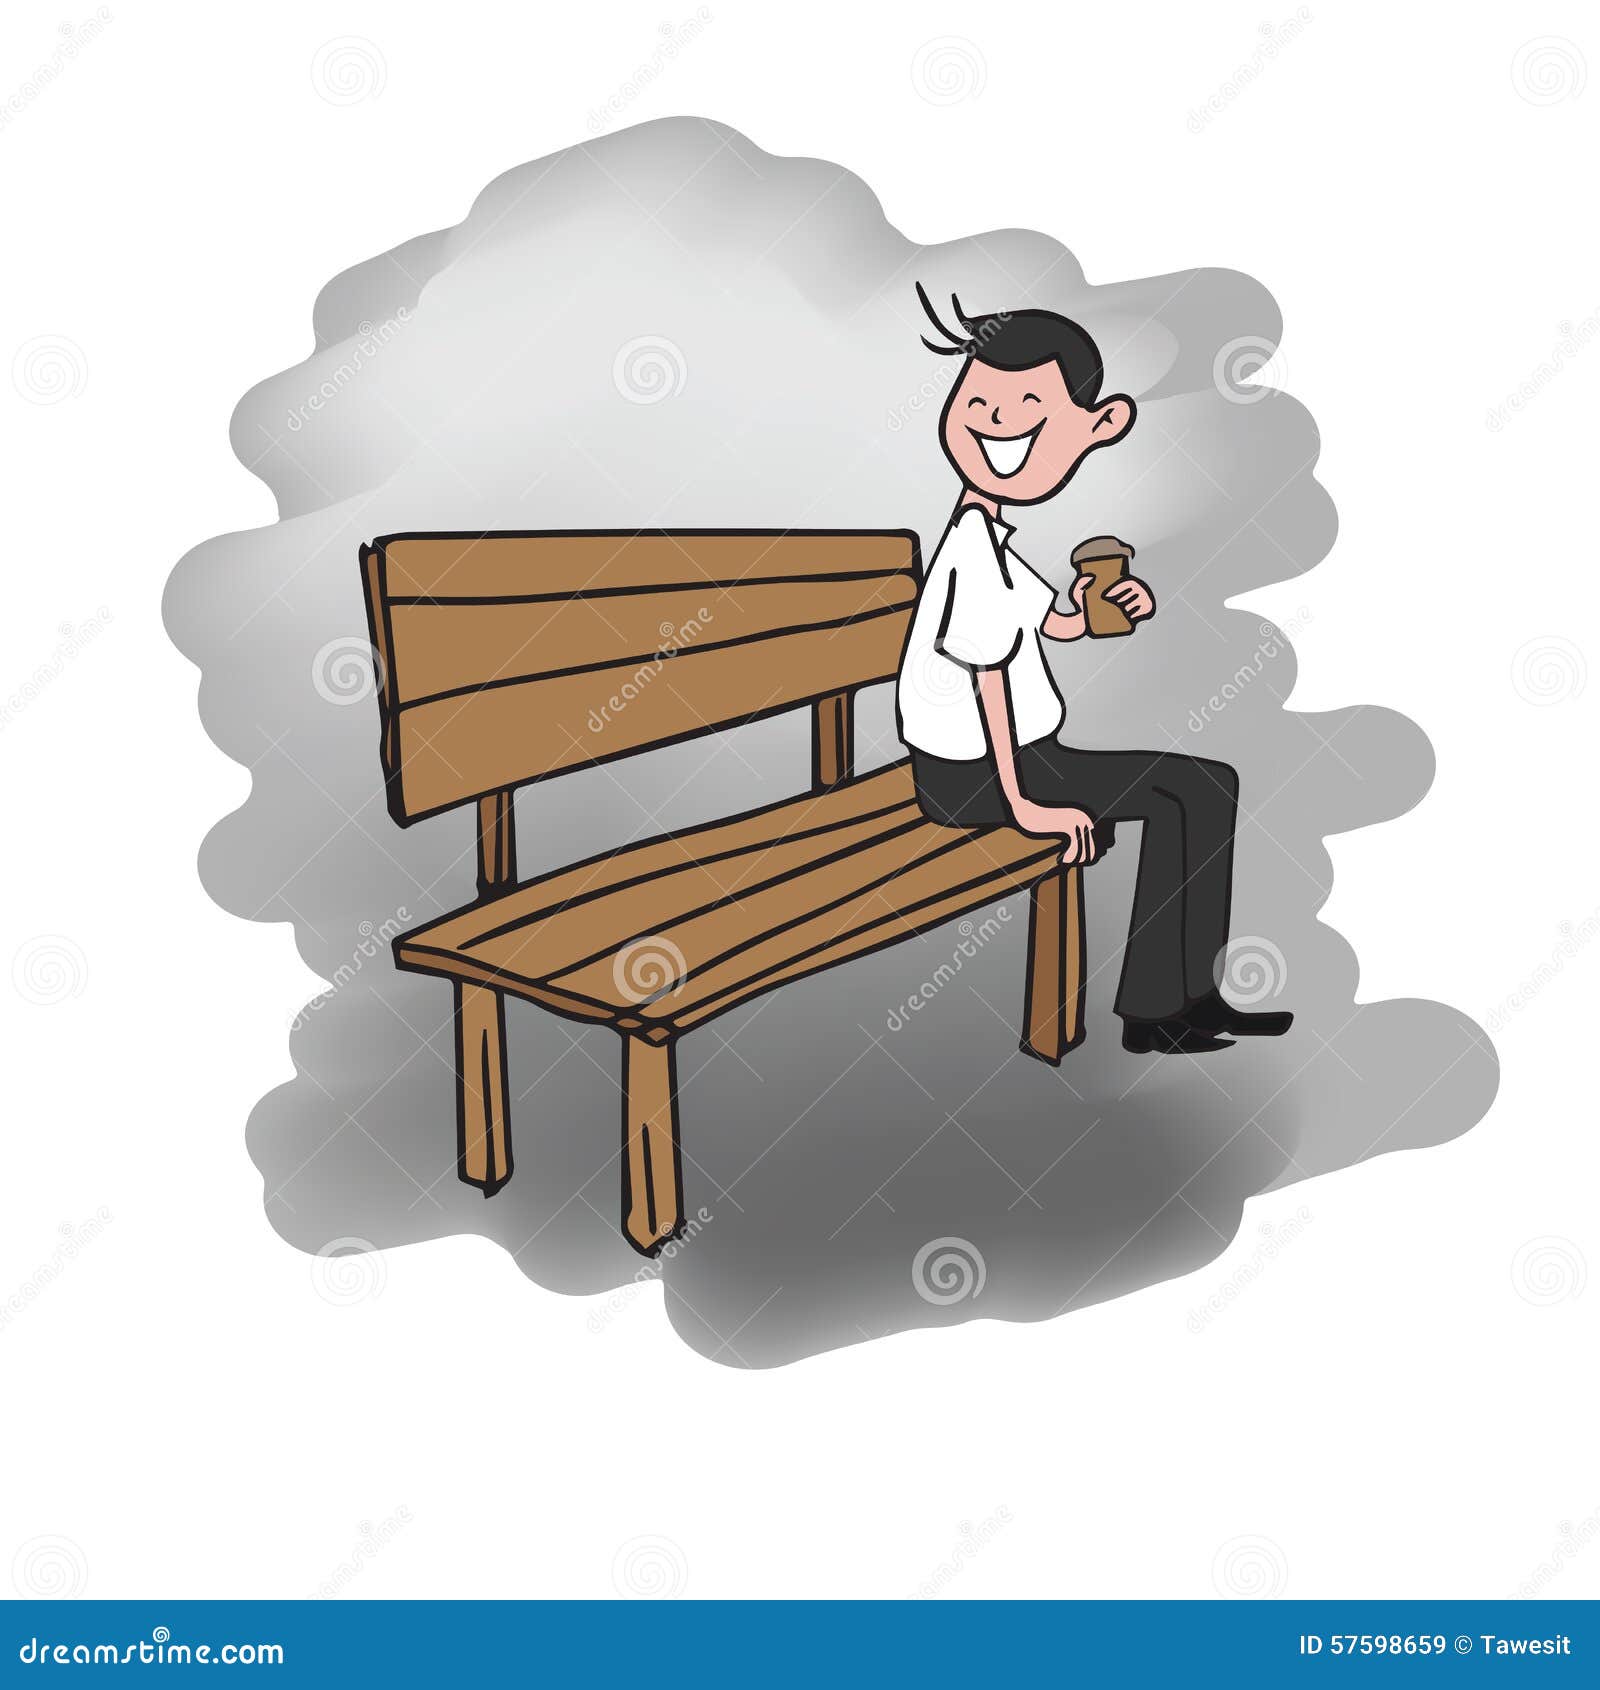 Man Sitting on Bench Drinking Coffee Stock Vector - Illustration of young,  cartoon: 57598659